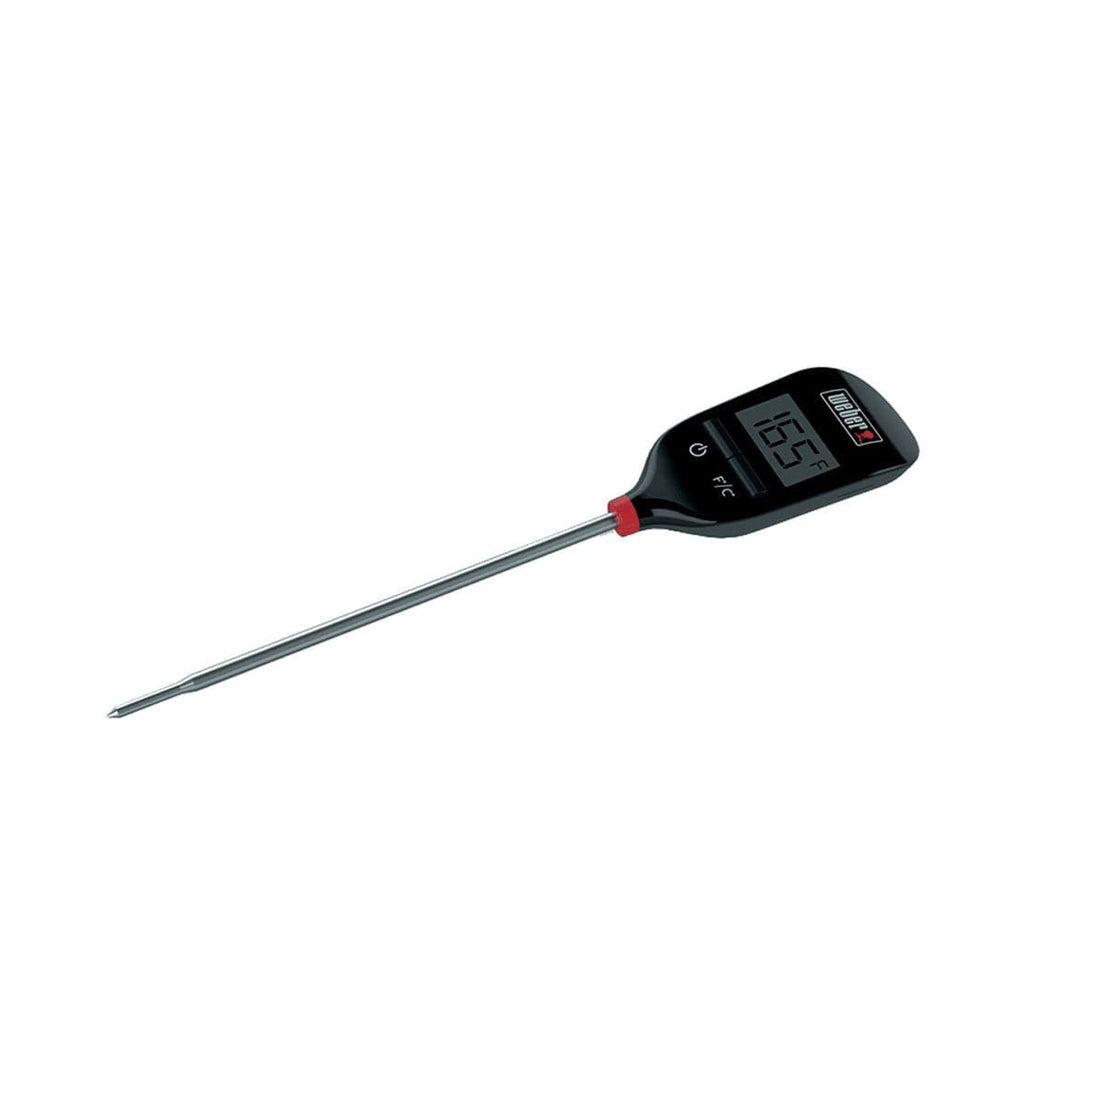 WEBER BARBECUE THERMOMETER - best price from Maltashopper.com BR500008929